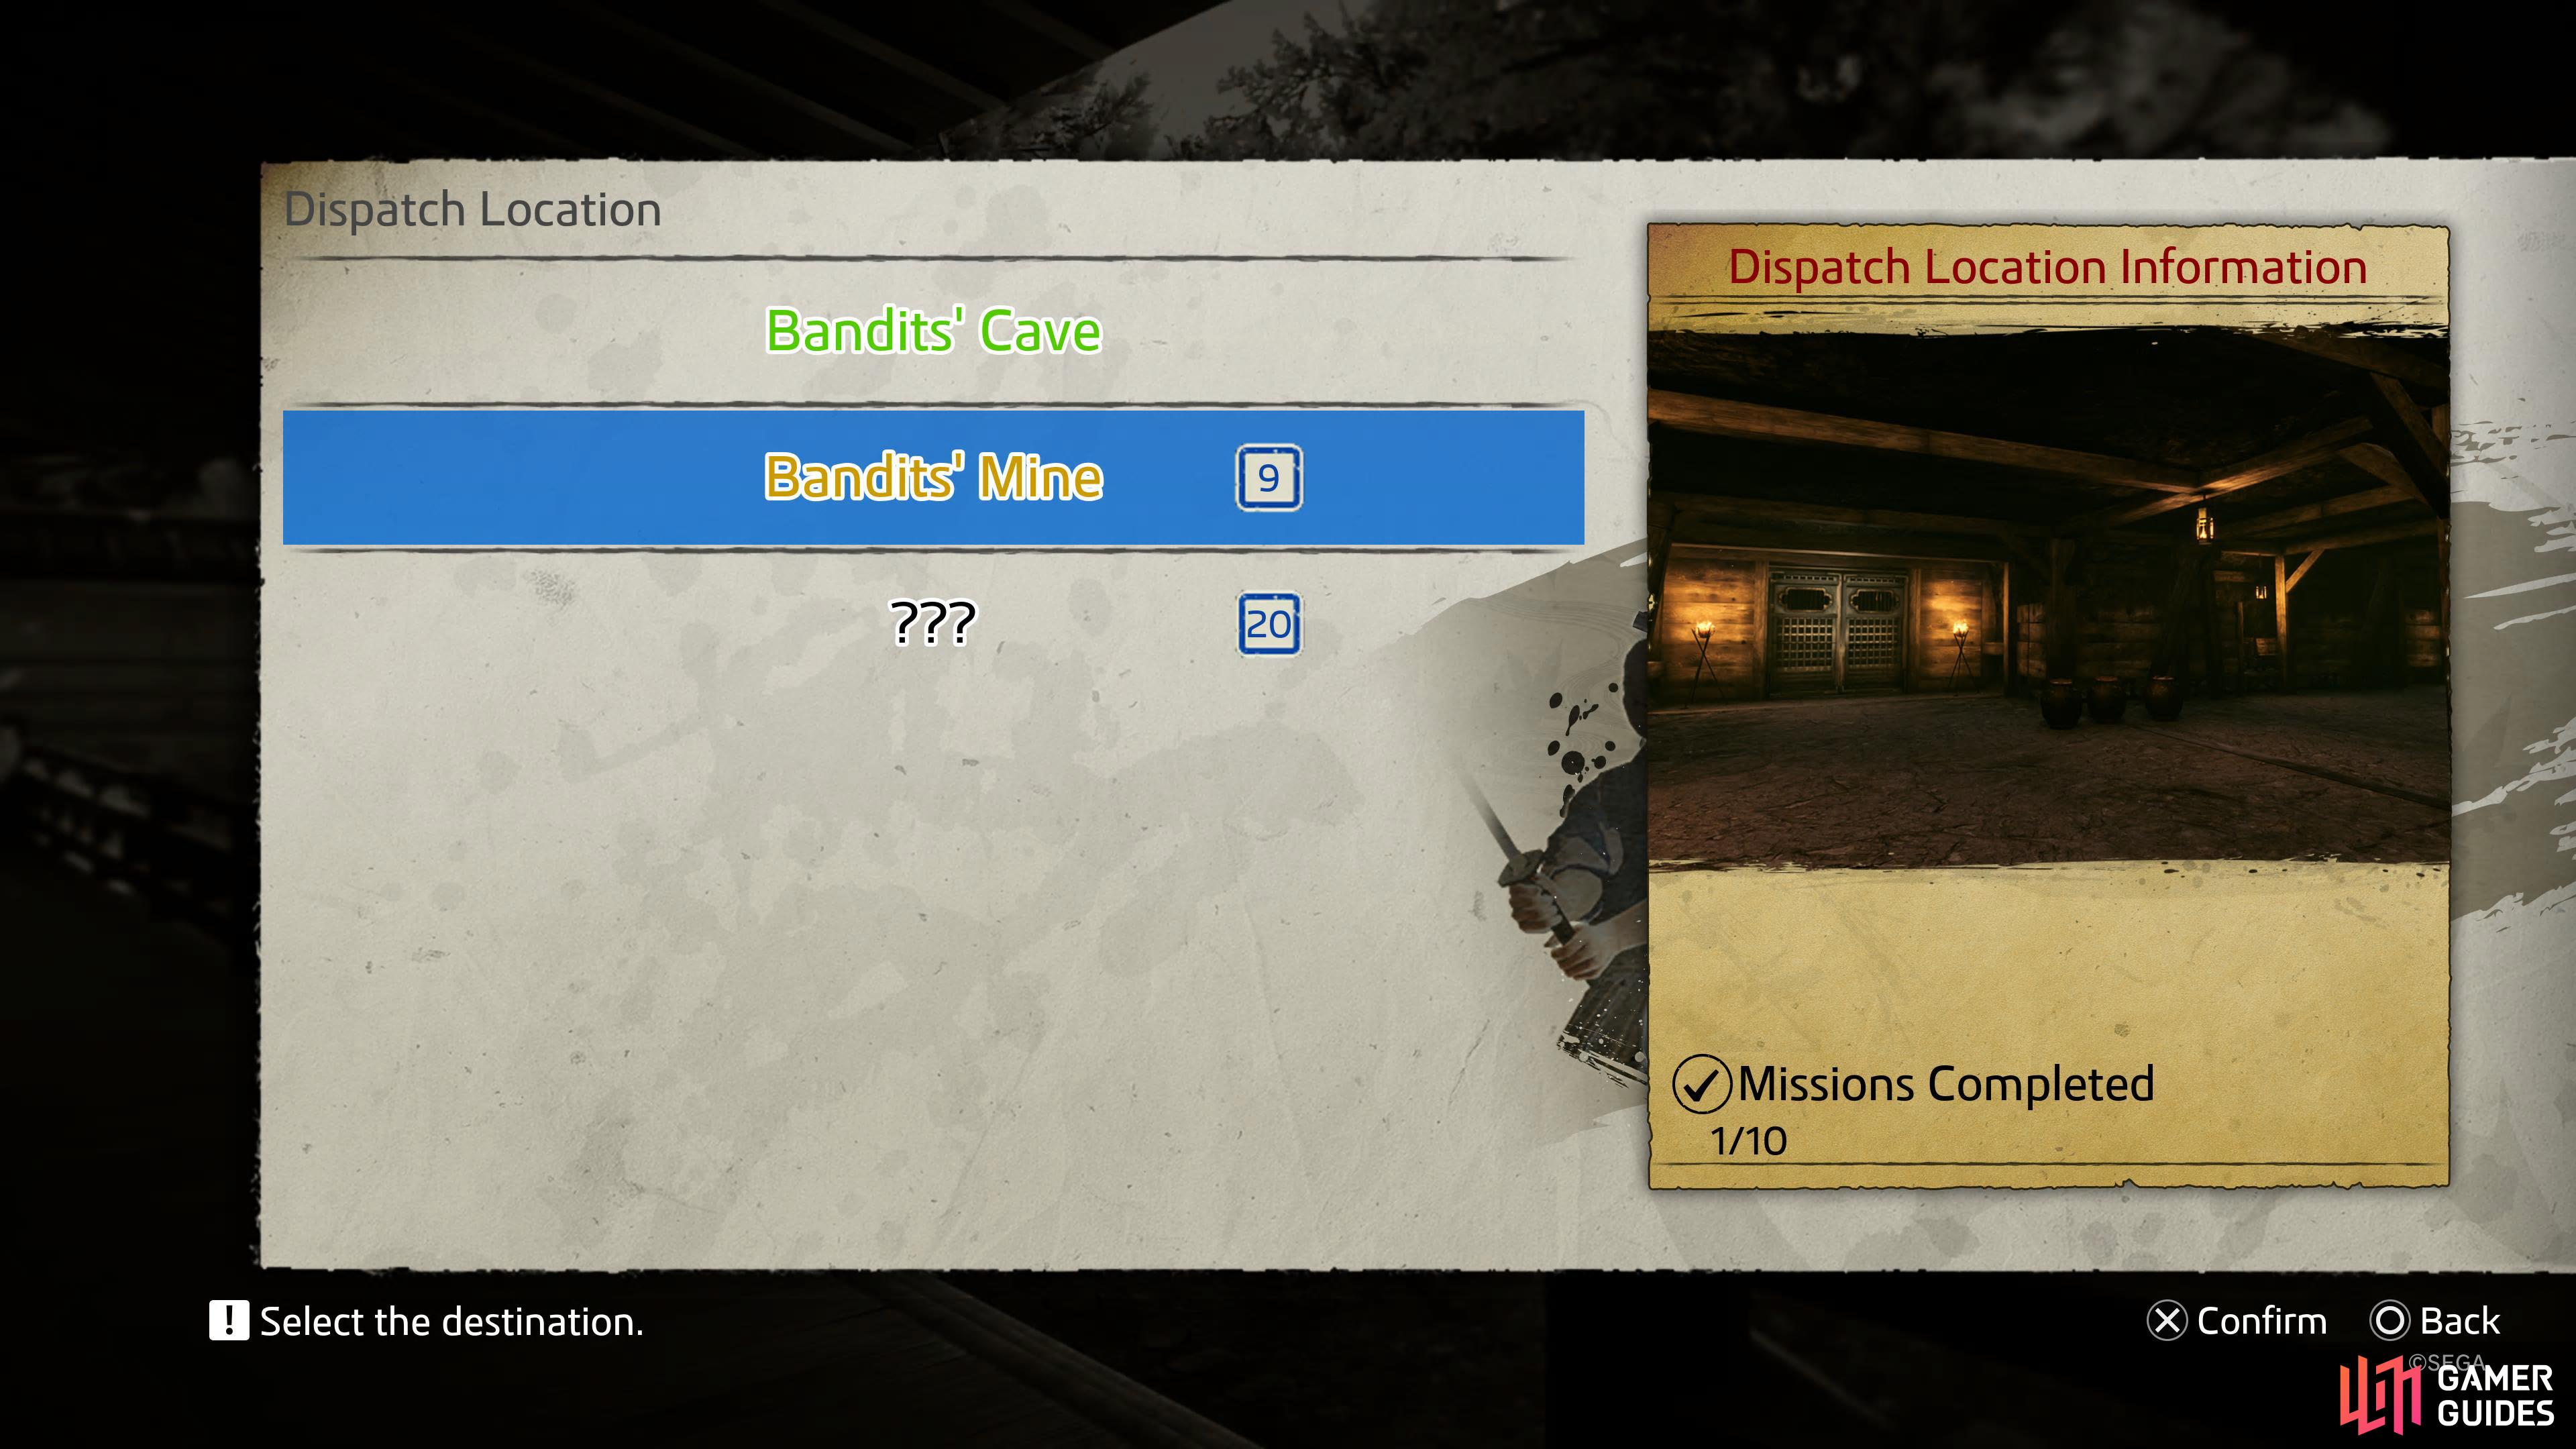 There are three categories to choose from, although you'll only have Bandit's Cave to start with.